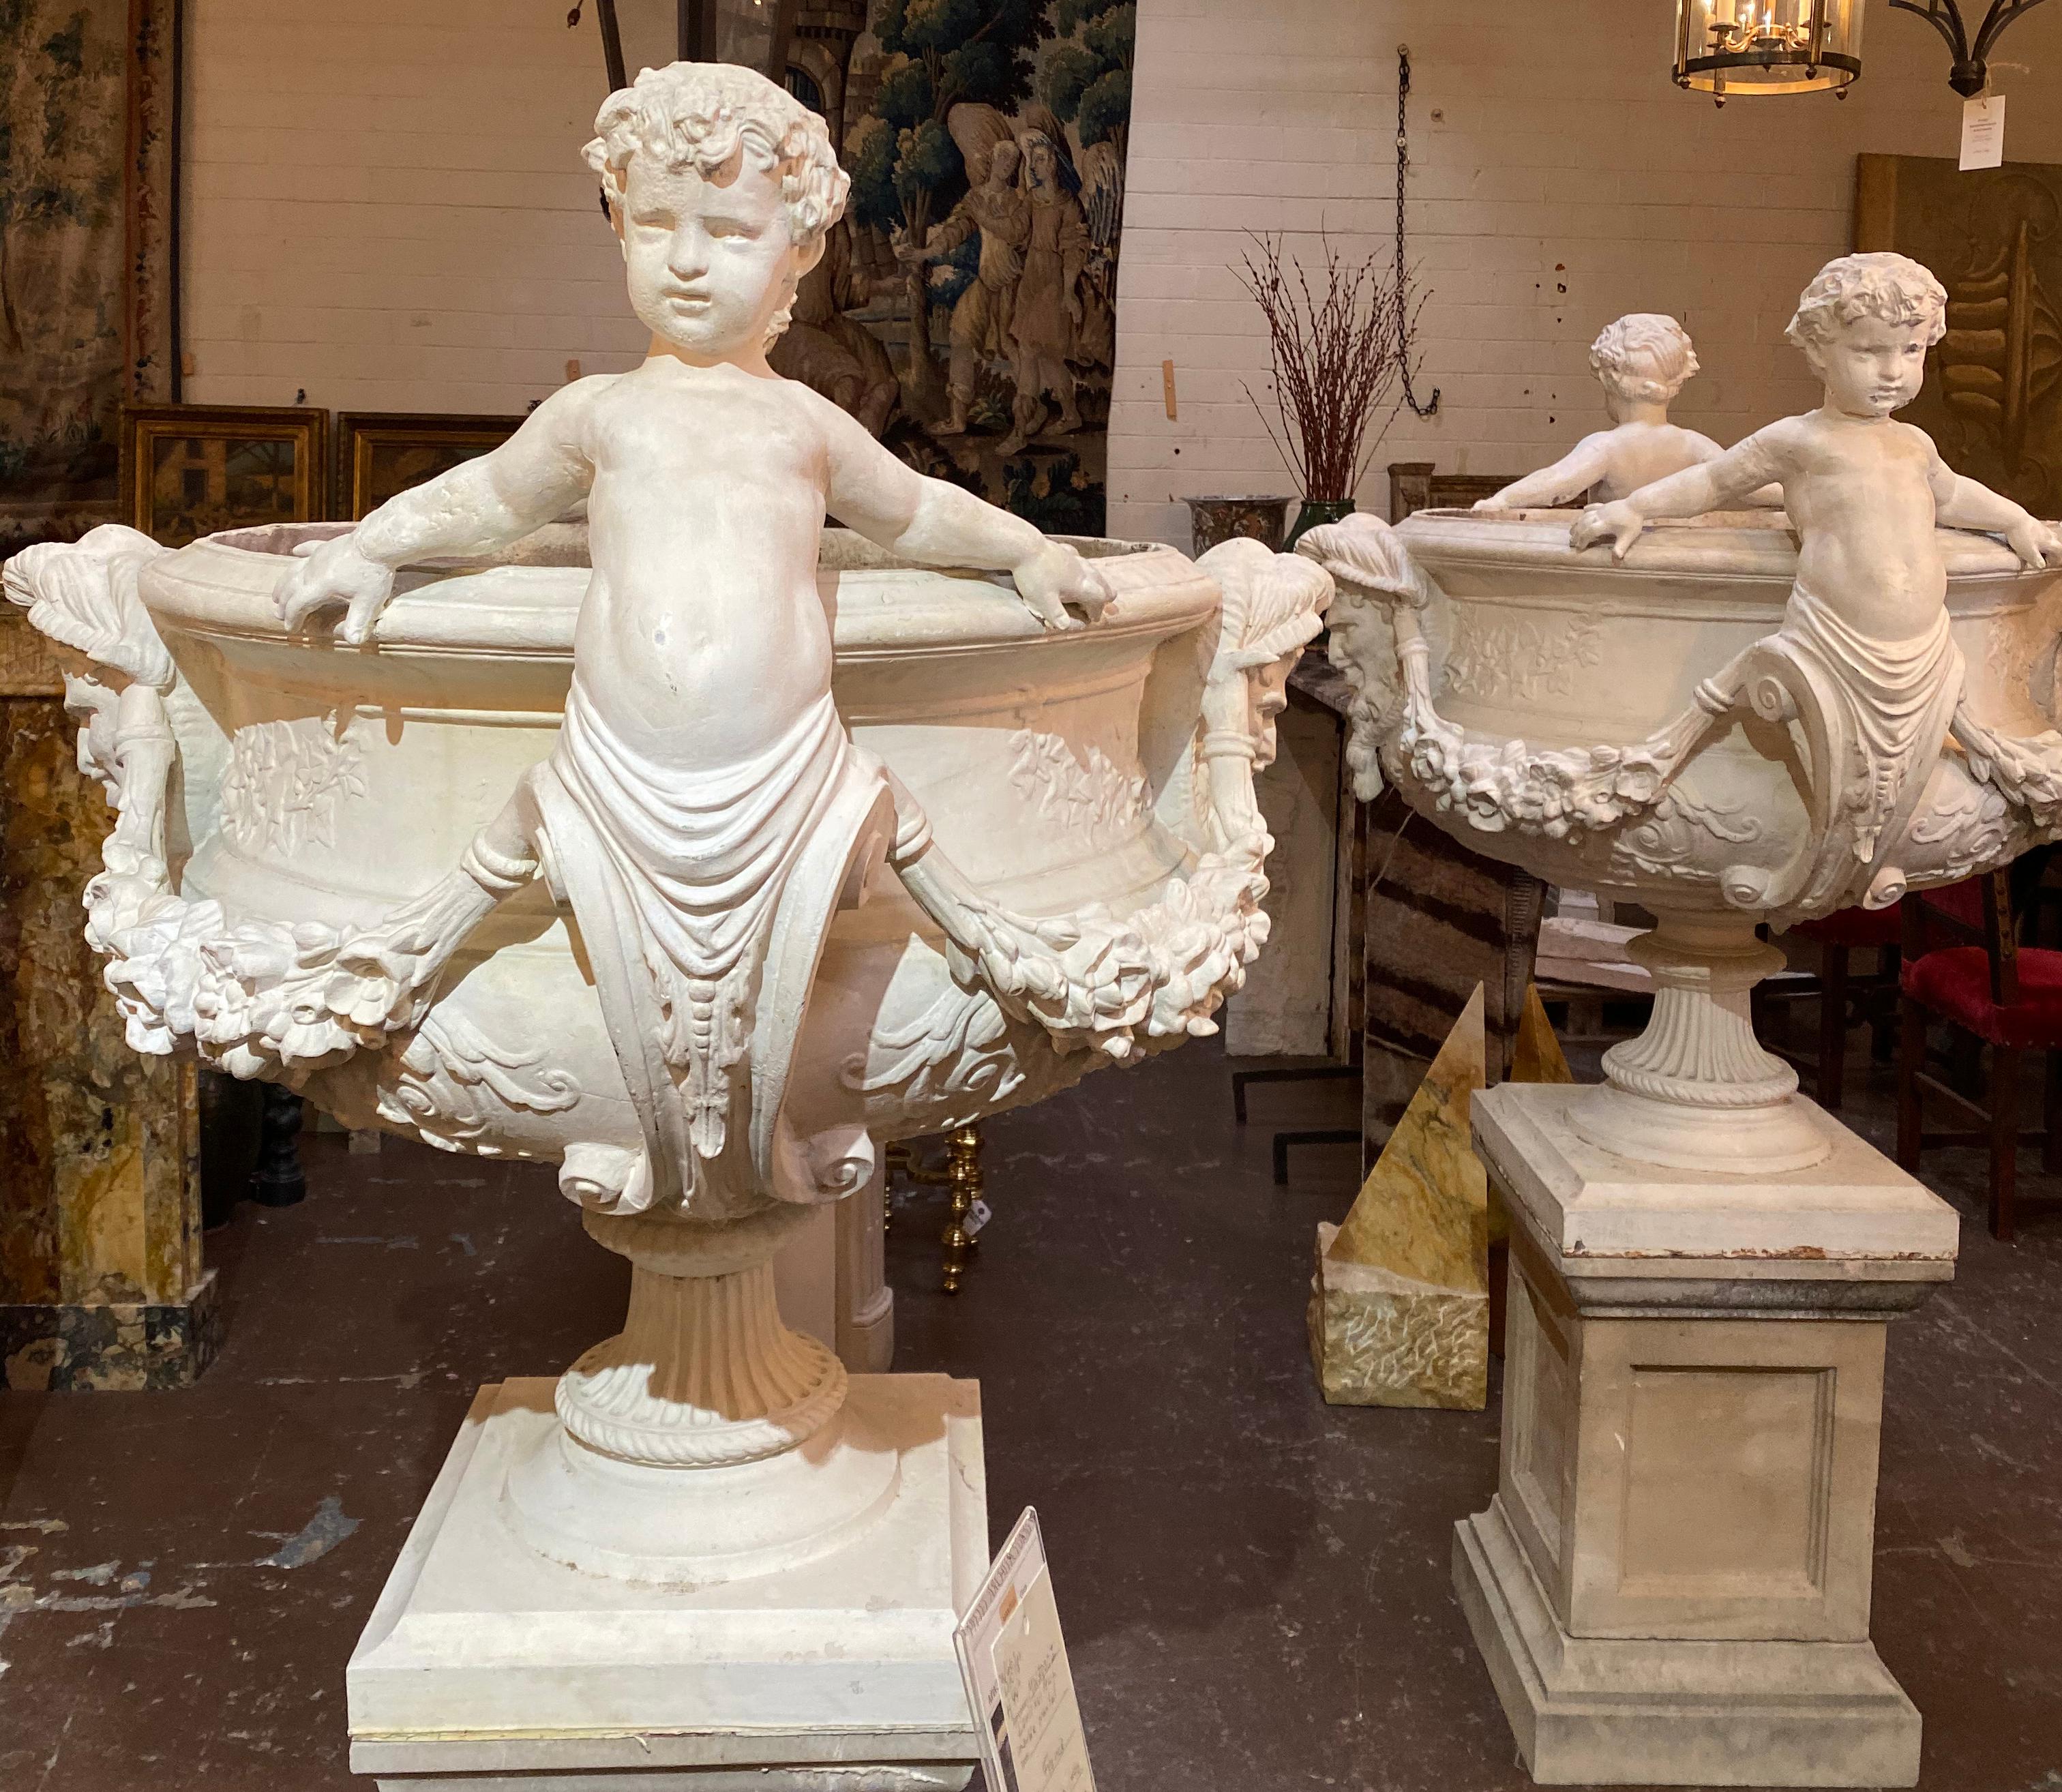 These grand statues function as planters, and originate from Italy, circa 1850s. Planters sold as a pair, bases in photos optional to purchase.

Measurements: 46